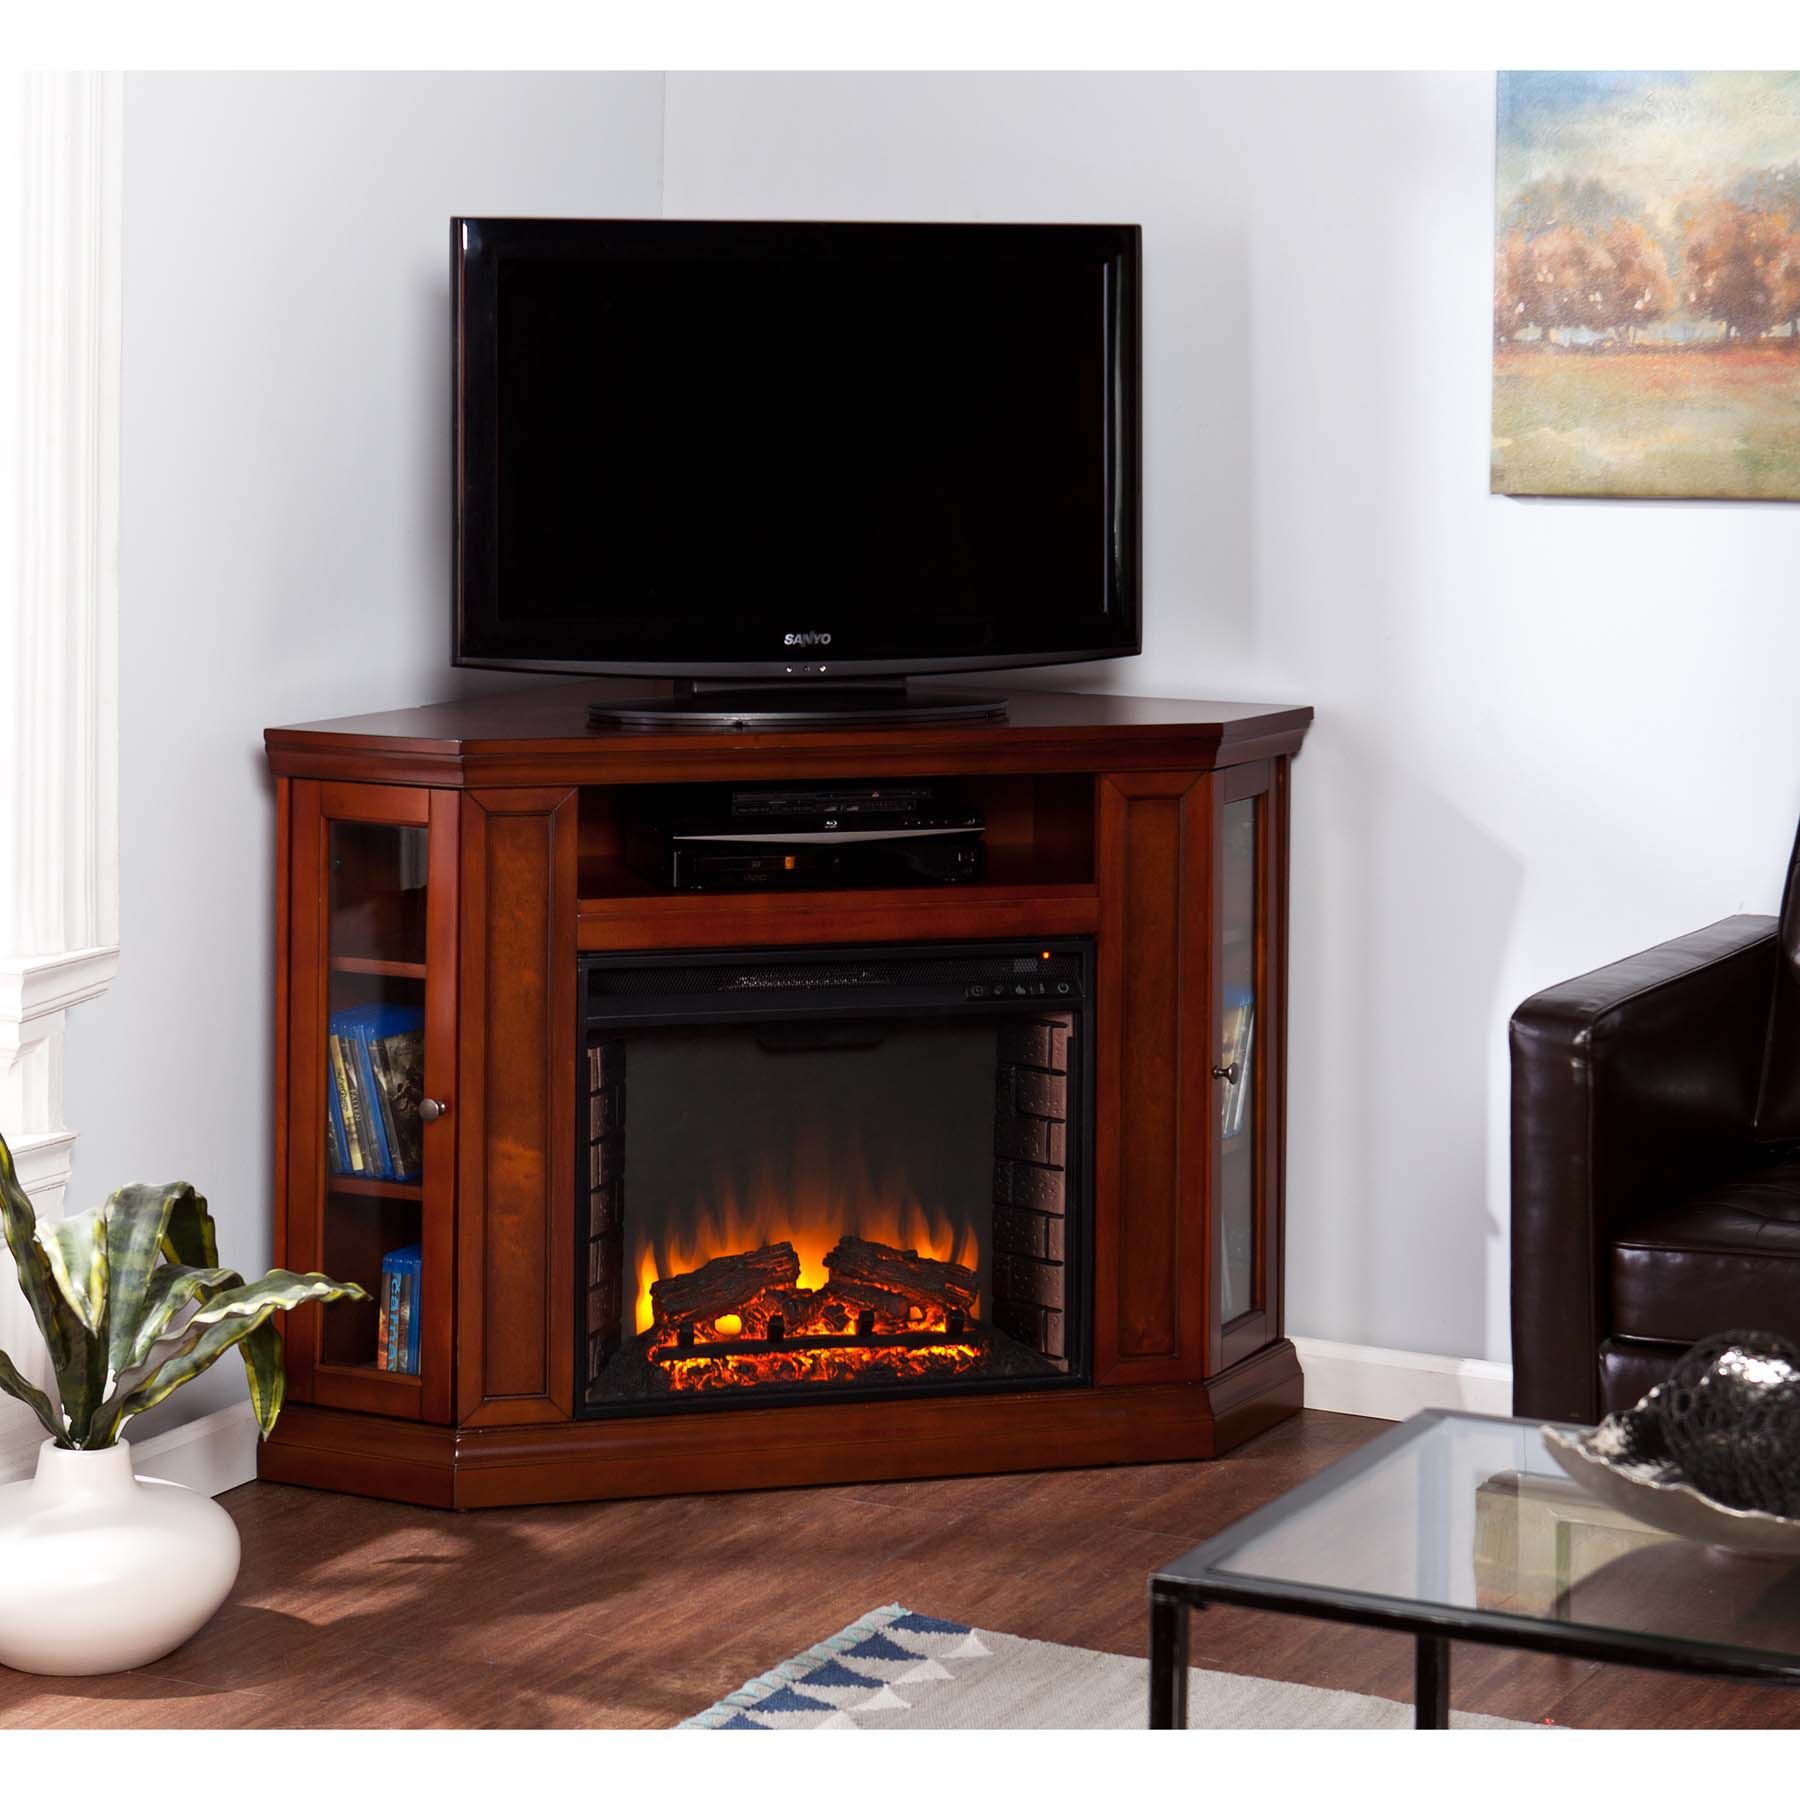 Solid Wood Entertainment Center with Fireplace Beautiful 42 Best Rustic Fireplace Images